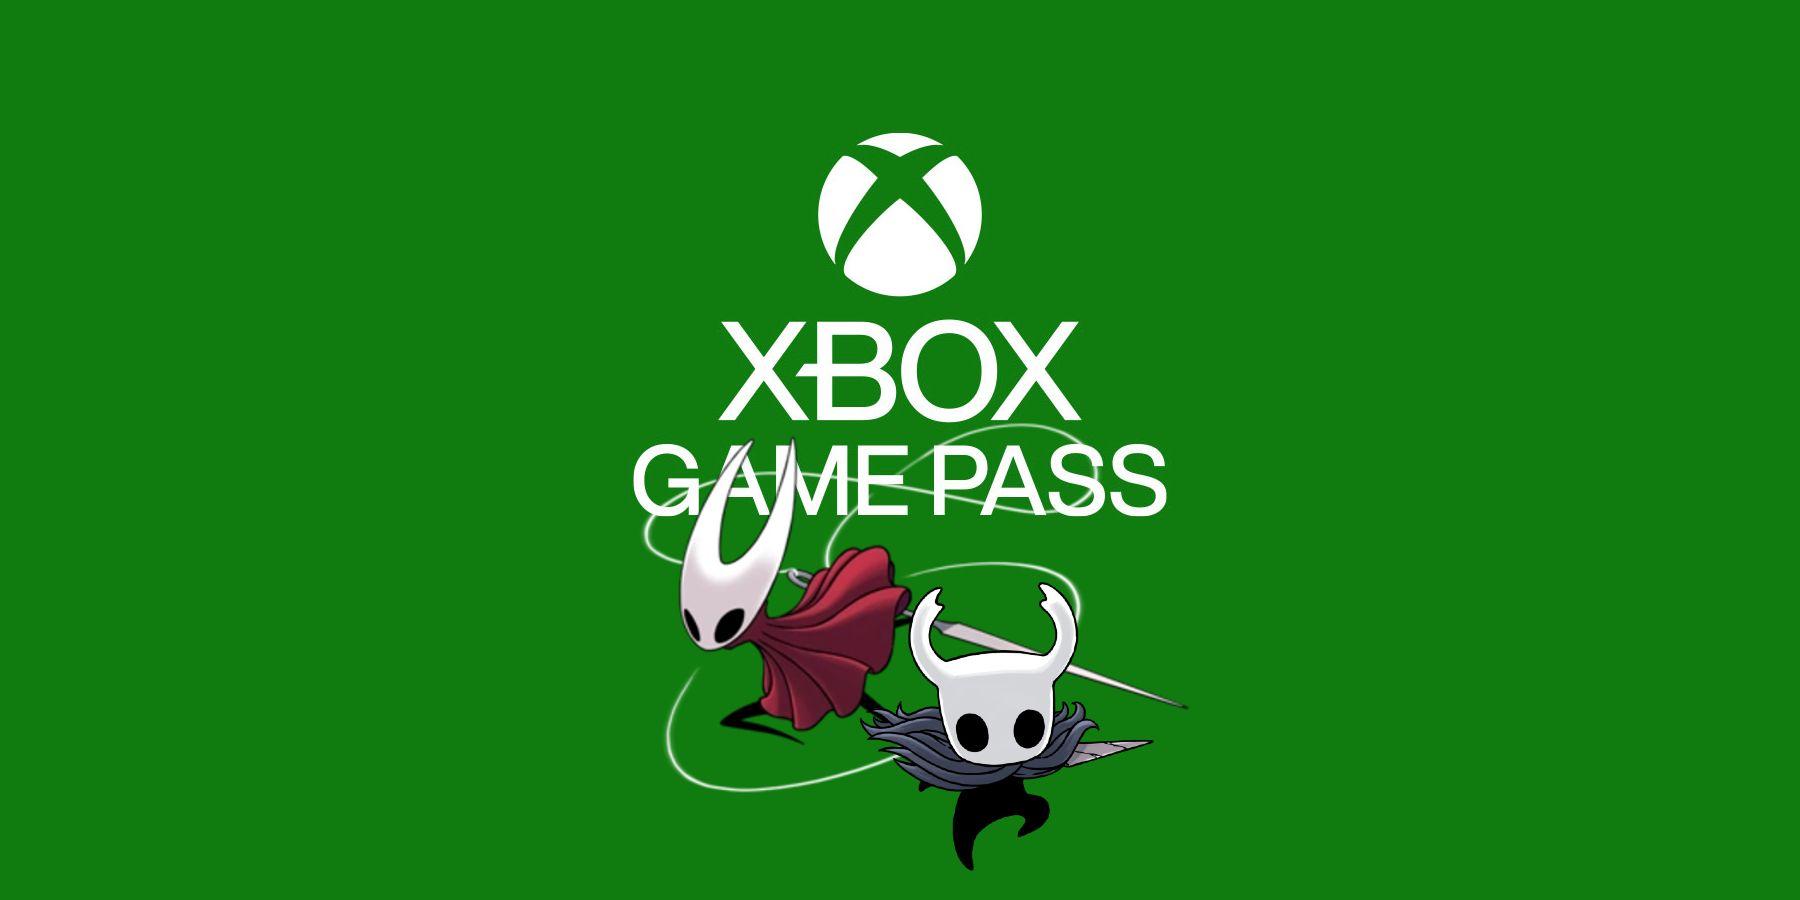 Hollow Knight: Silksong is coming to Xbox Series X